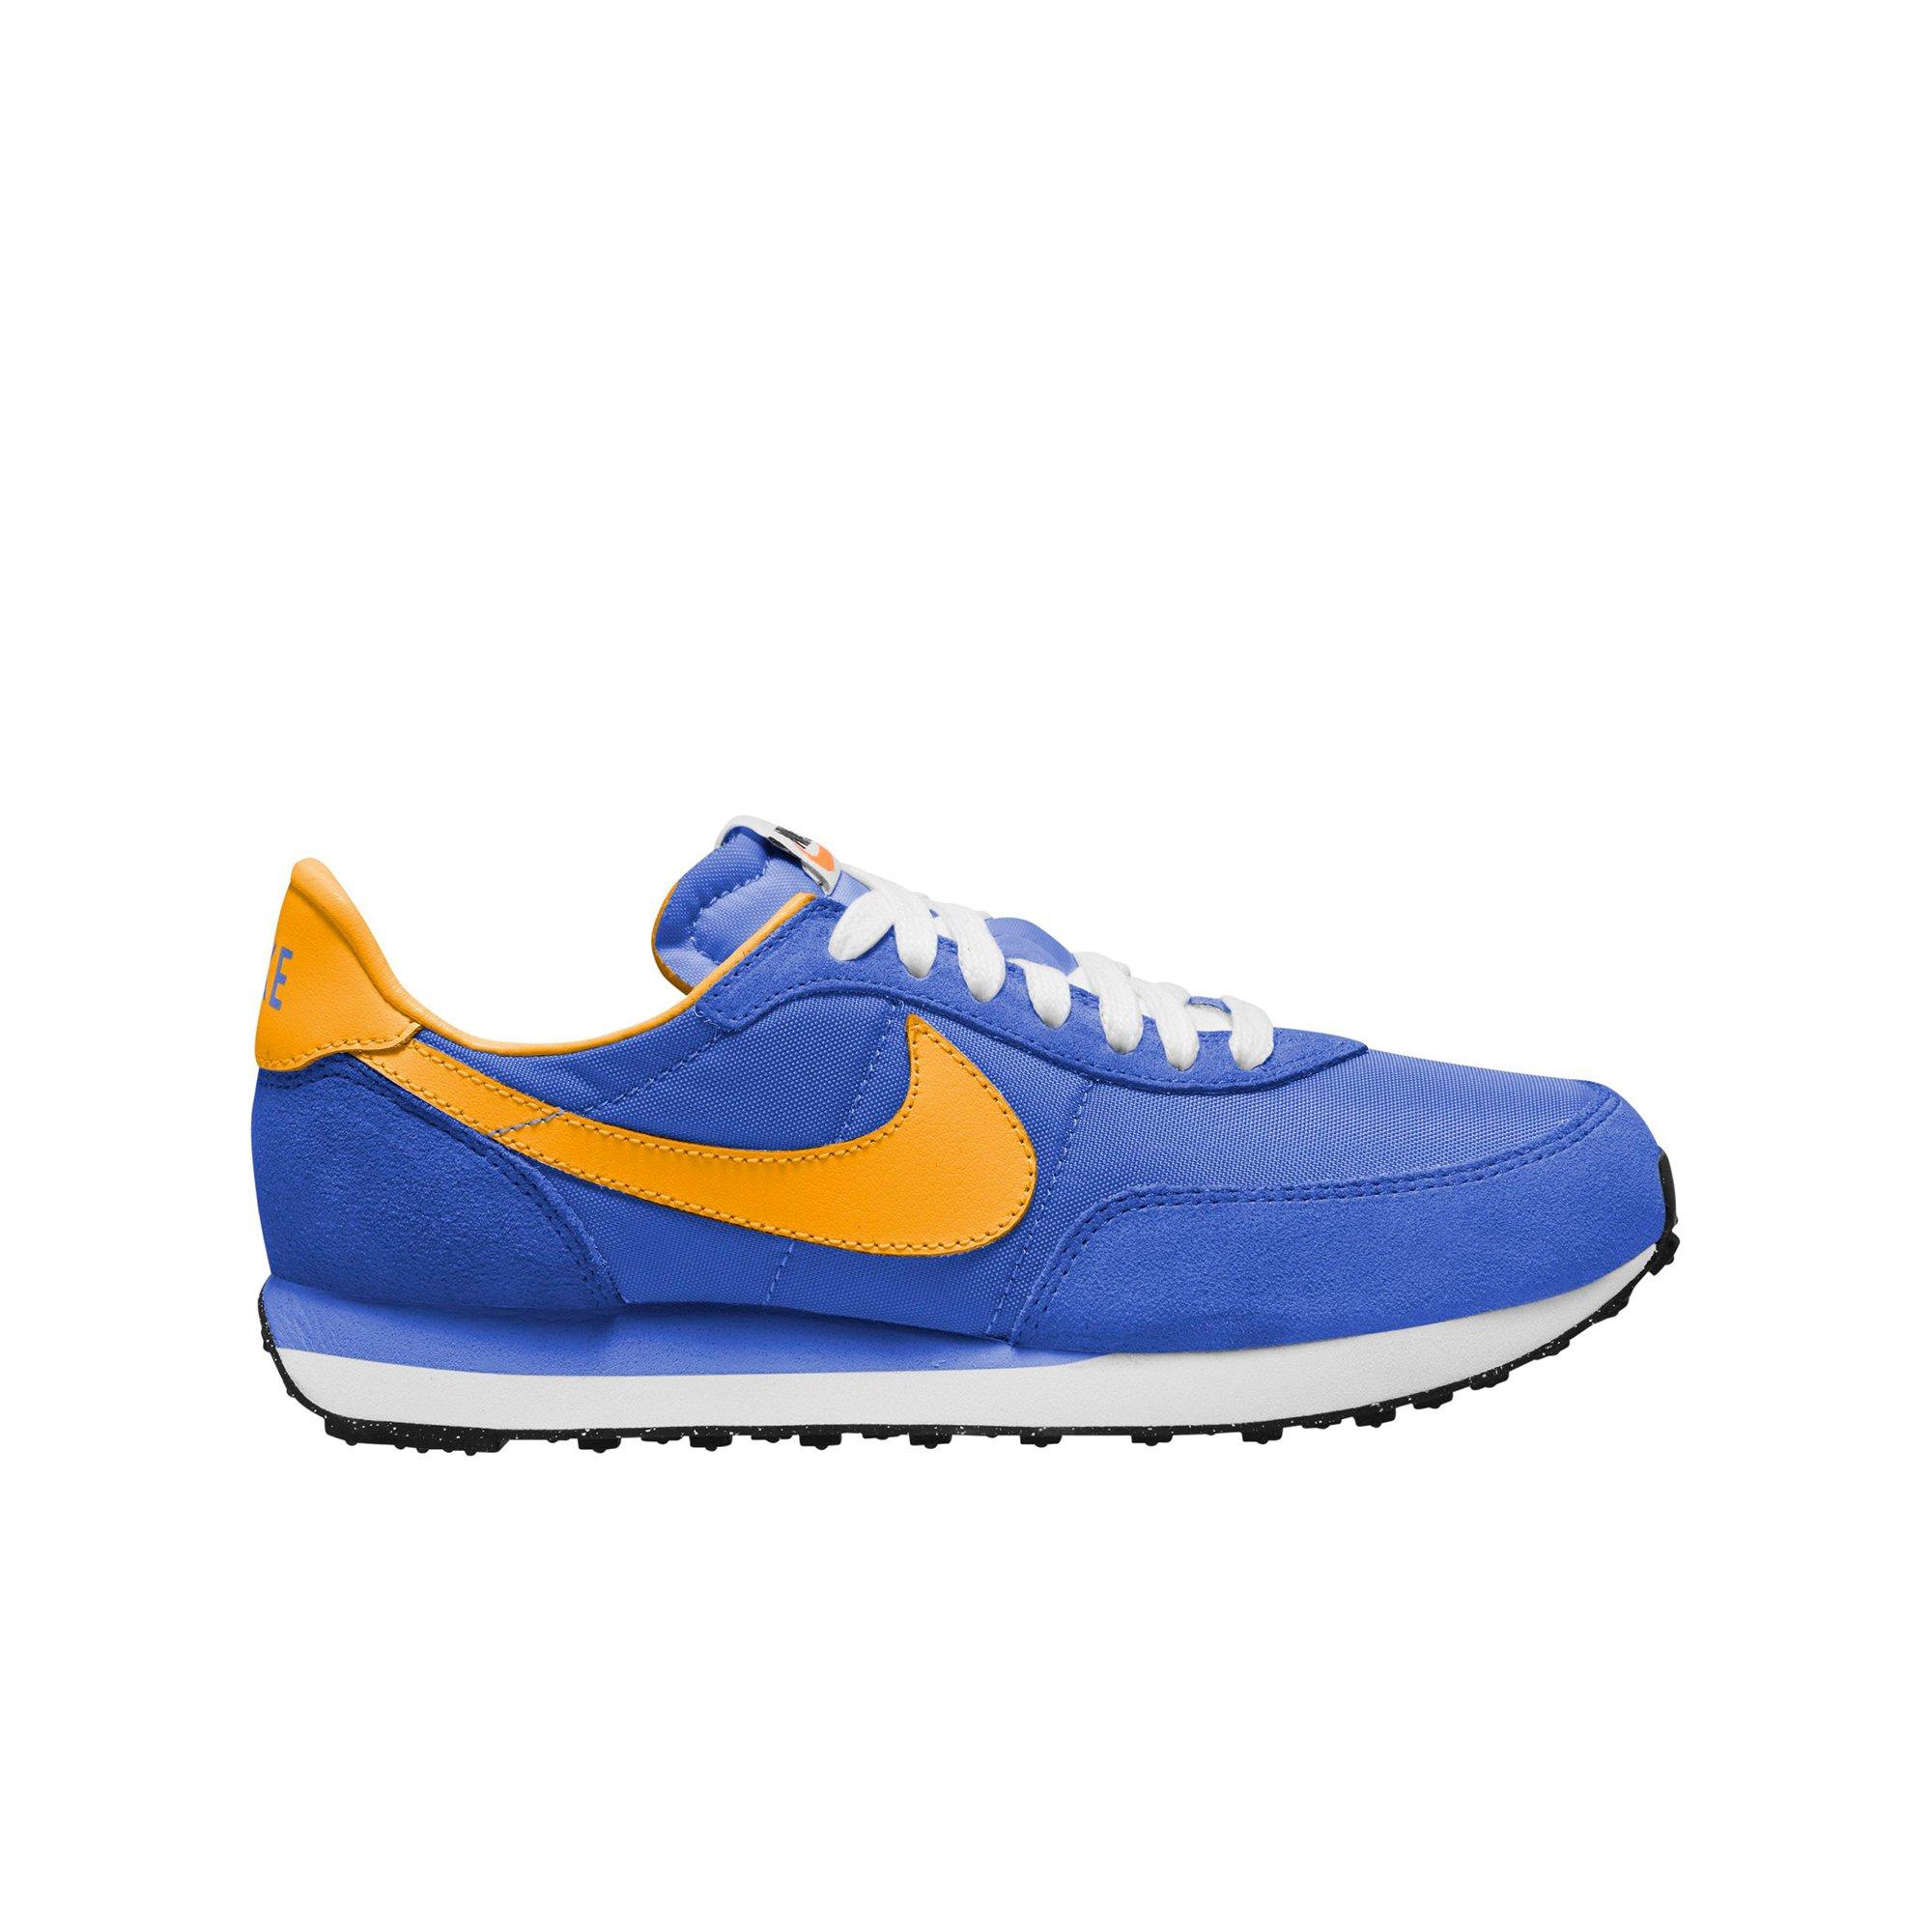 Nike Waffle Trainer For Sale | lupon.gov.ph